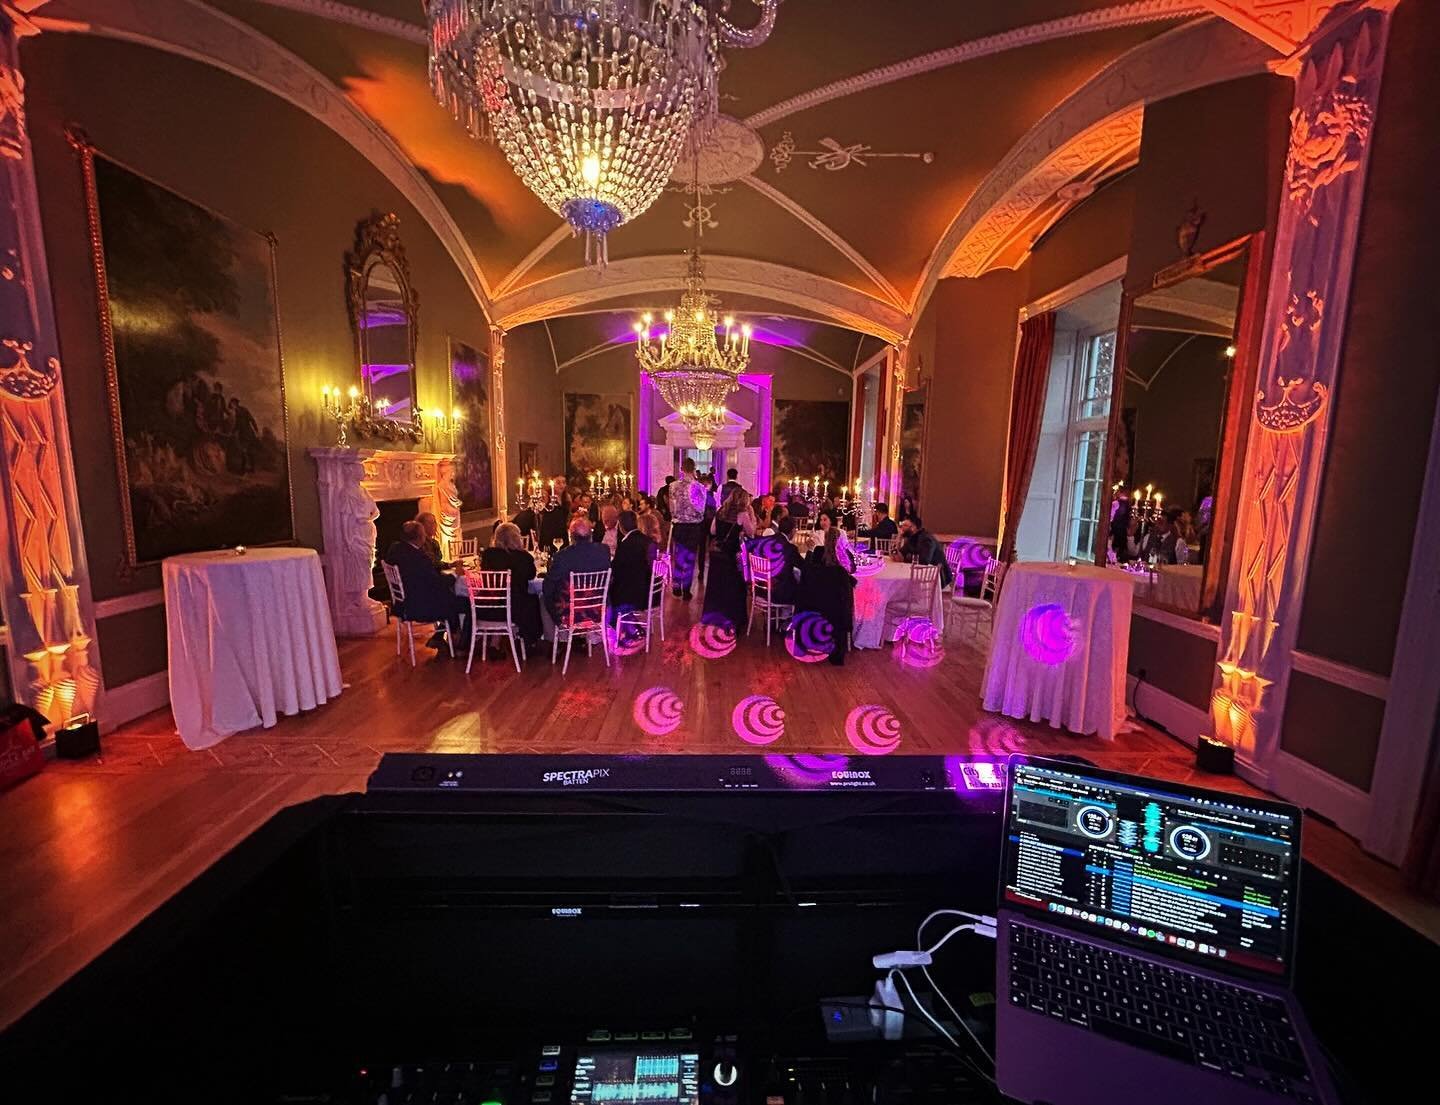 #castle #clubvibes 
#DJ 🪩 #SteveCooper 🪩#luttrellstowncastle 🧡

@stevencooperdj 🕺🙏
Shout out of thanks to @jillym1975 - a beautifully executed programme of events this week for @eventpartnersireland 
And we were delighted to be involved again to